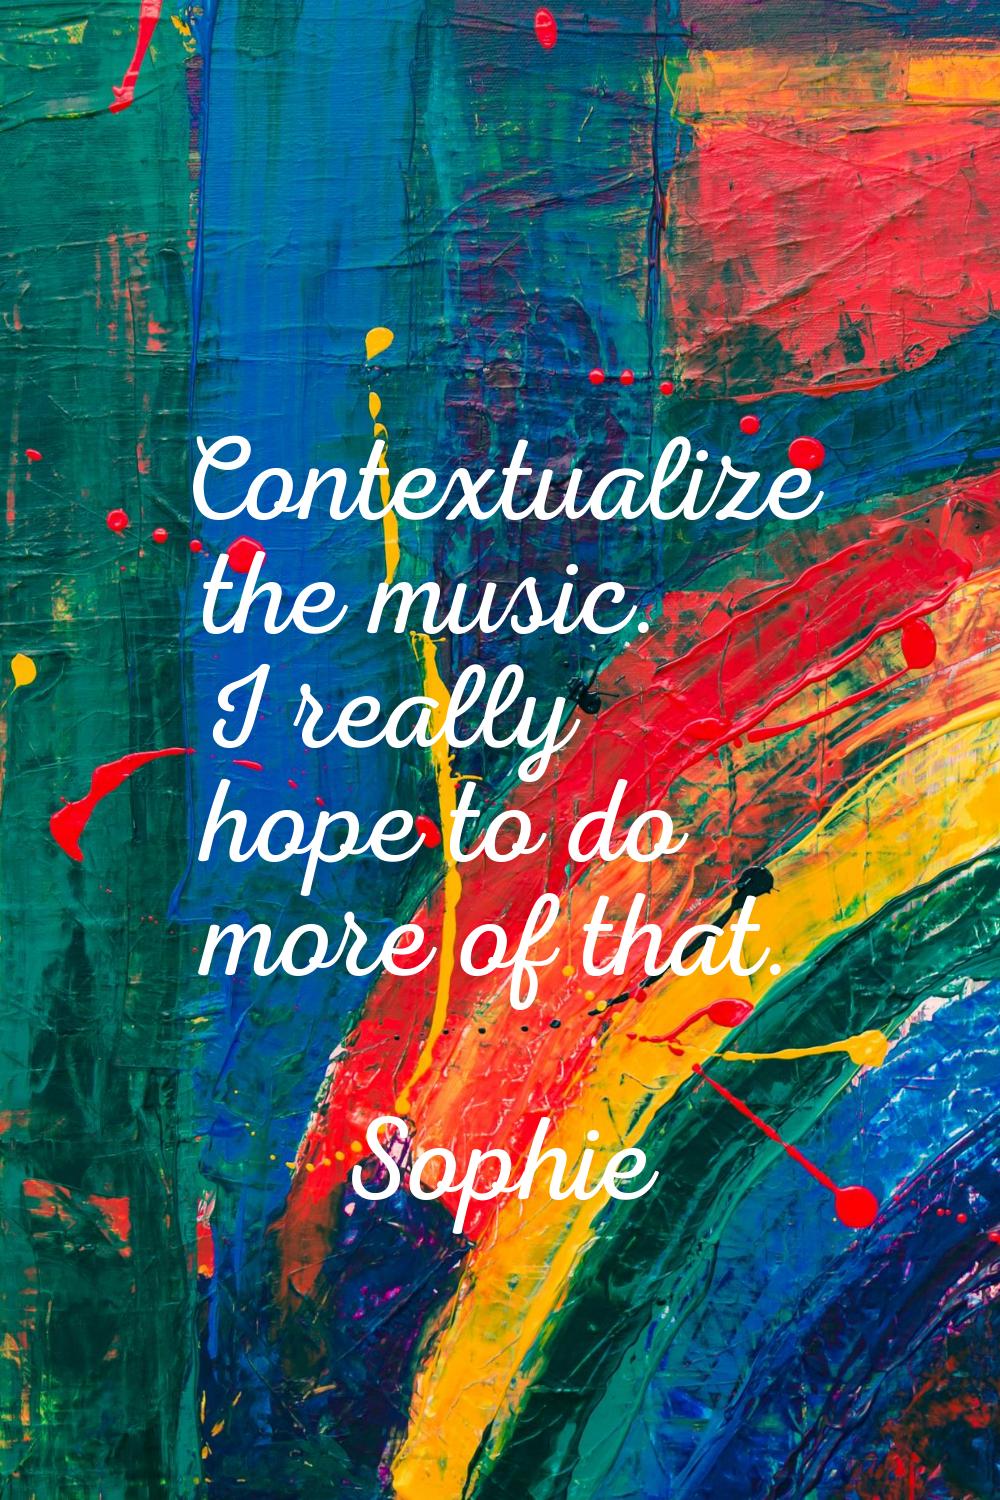 Contextualize the music. I really hope to do more of that.